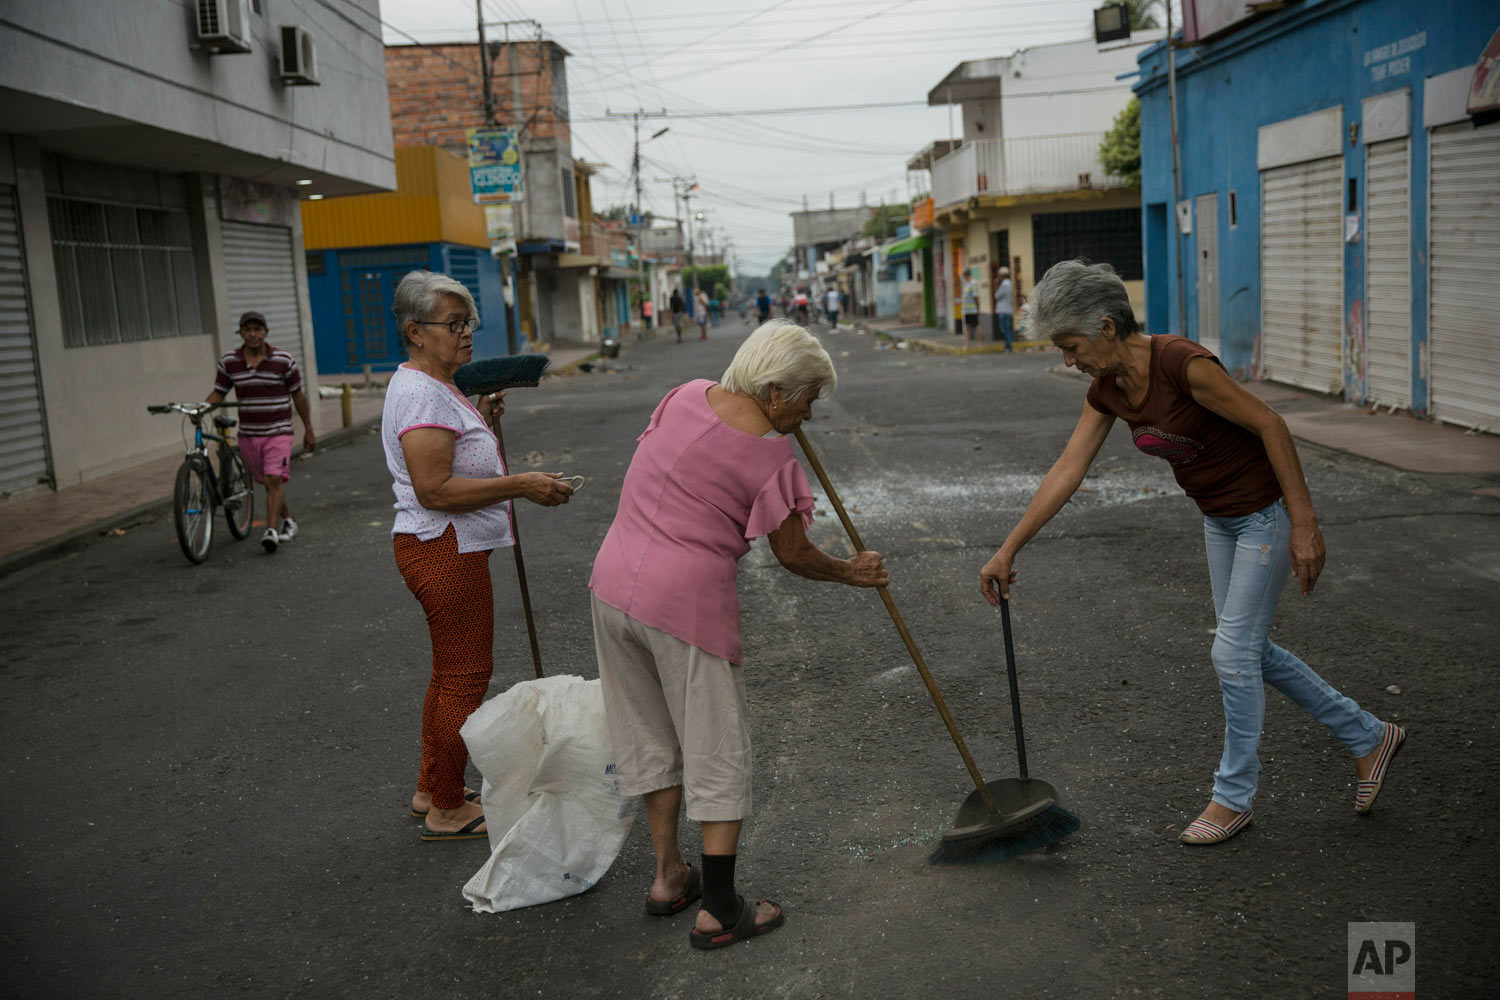  Neighbors clean the streets a day after clashes between anti-government protesters and the Venezuelan Bolivarian National Guard in Urena, Venezuela, near the border with Colombia, Sunday, Feb. 24, 2019. (AP Photo/Rodrigo Abd) 